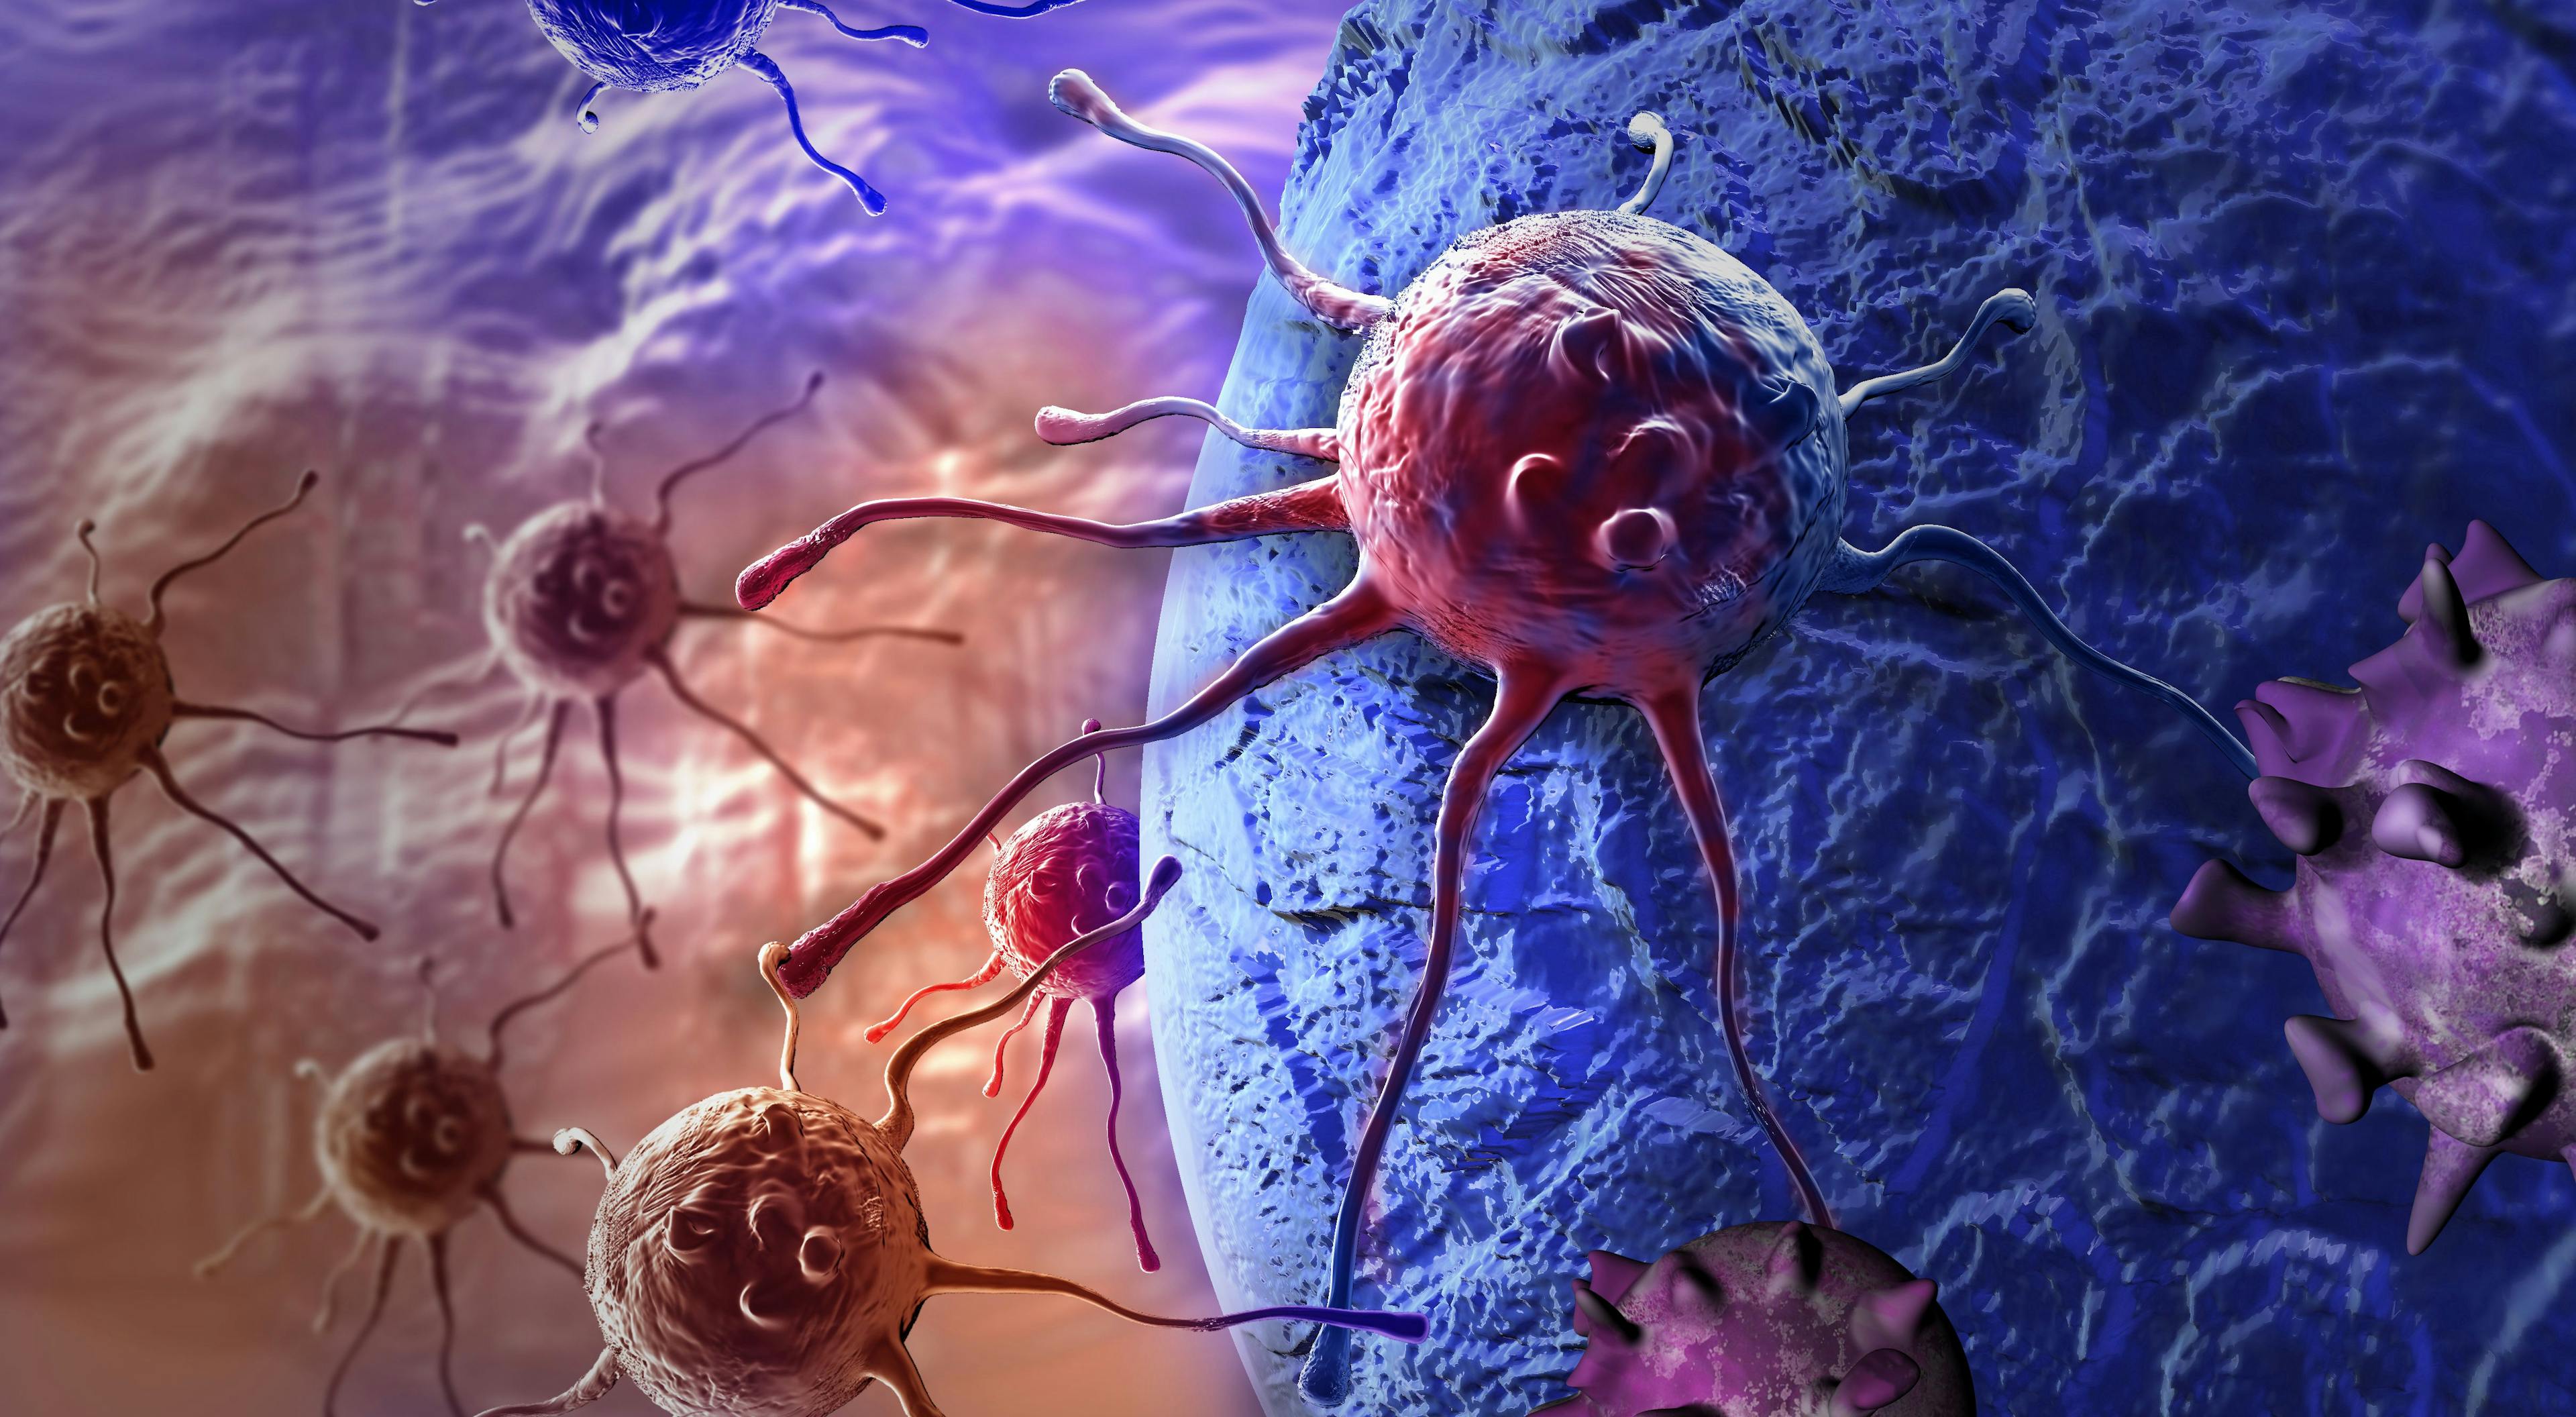 CAR-T Cell Therapy Shows Promise in Patients with Mantle Cell Lymphoma